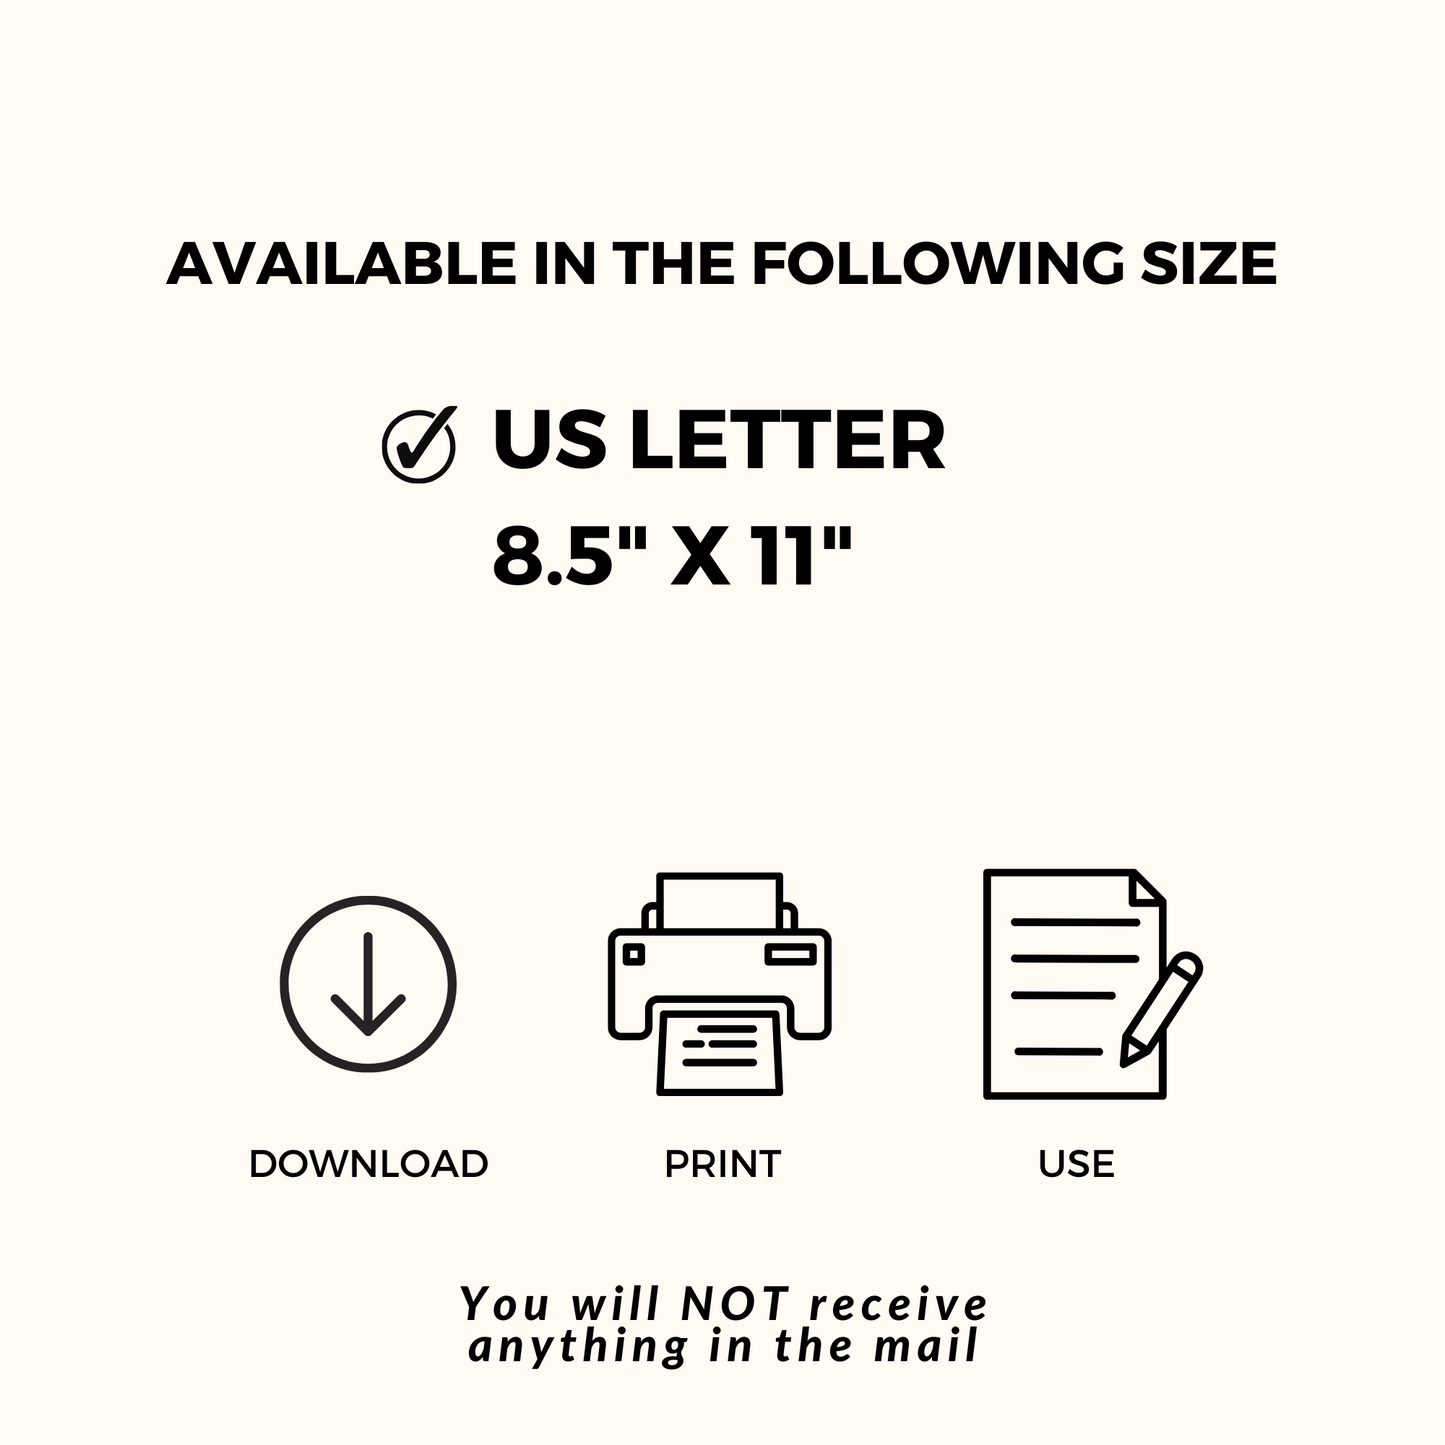 Printable 8.5 x 11  paper, download, print and use nothing will be shipped to you